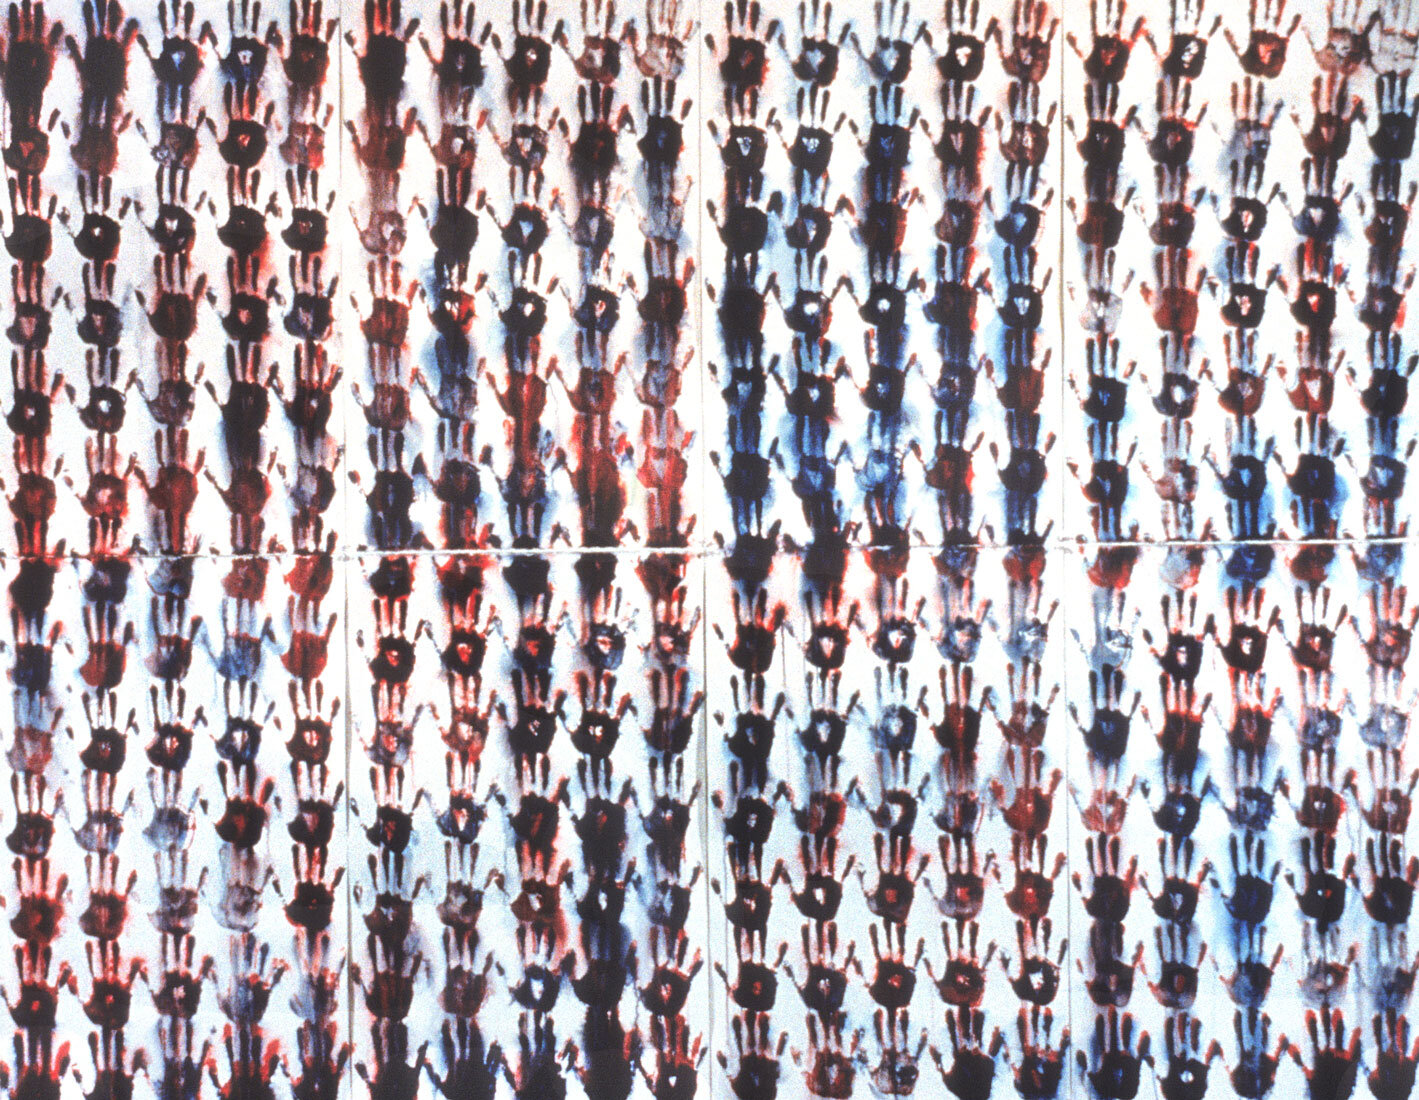   280 Hands , 1994, acrylic on paper, 82 x 104 inches 